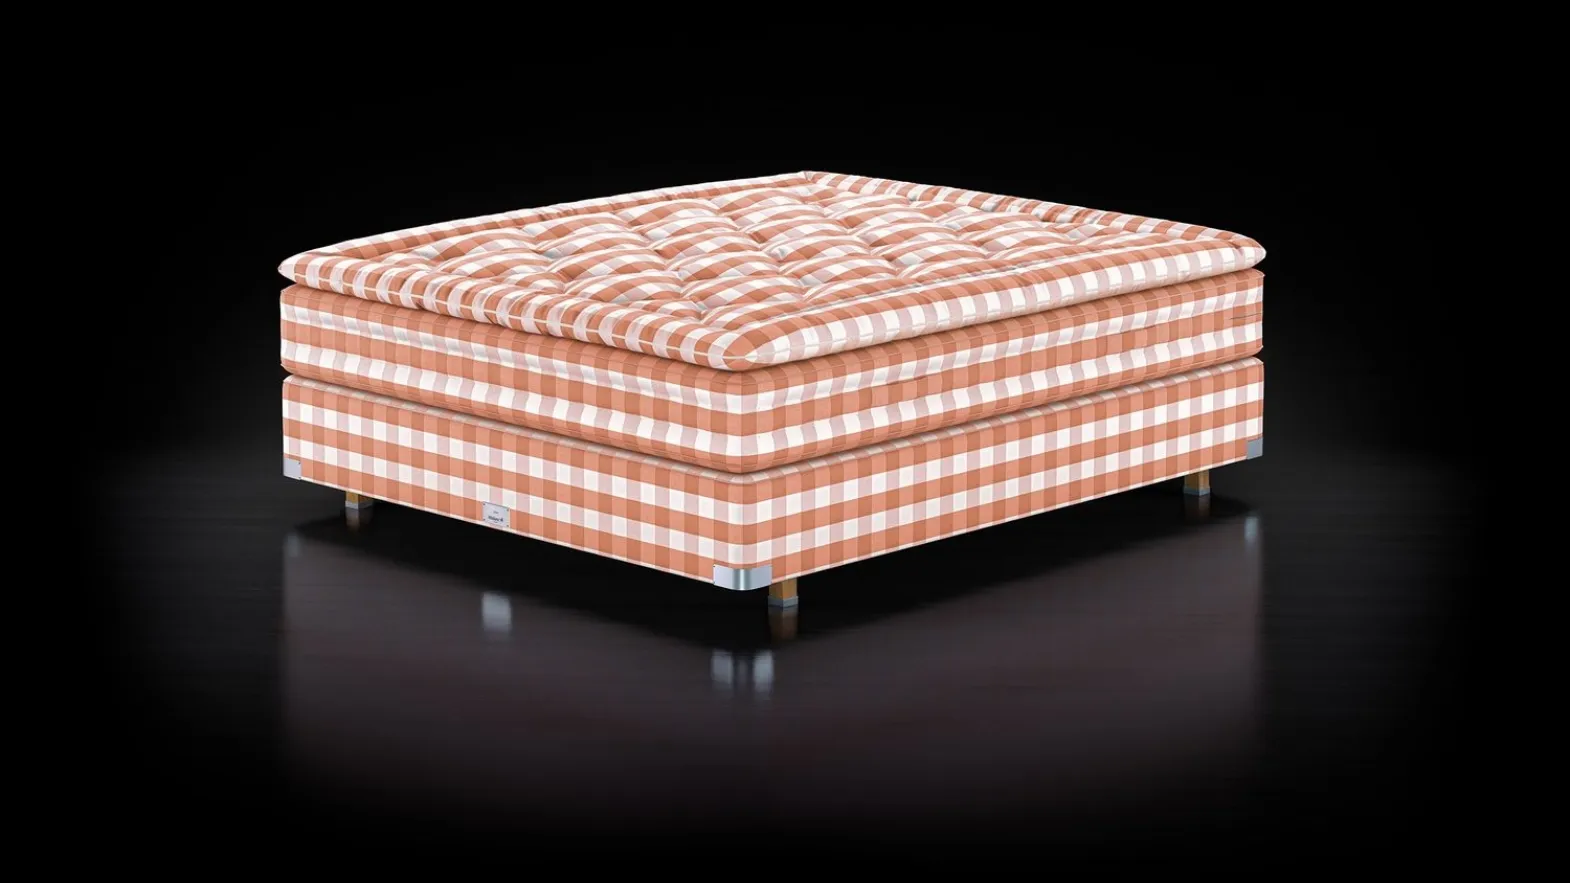 Letto sommier Herlewing in tessuto Red Earth Check di Hastens